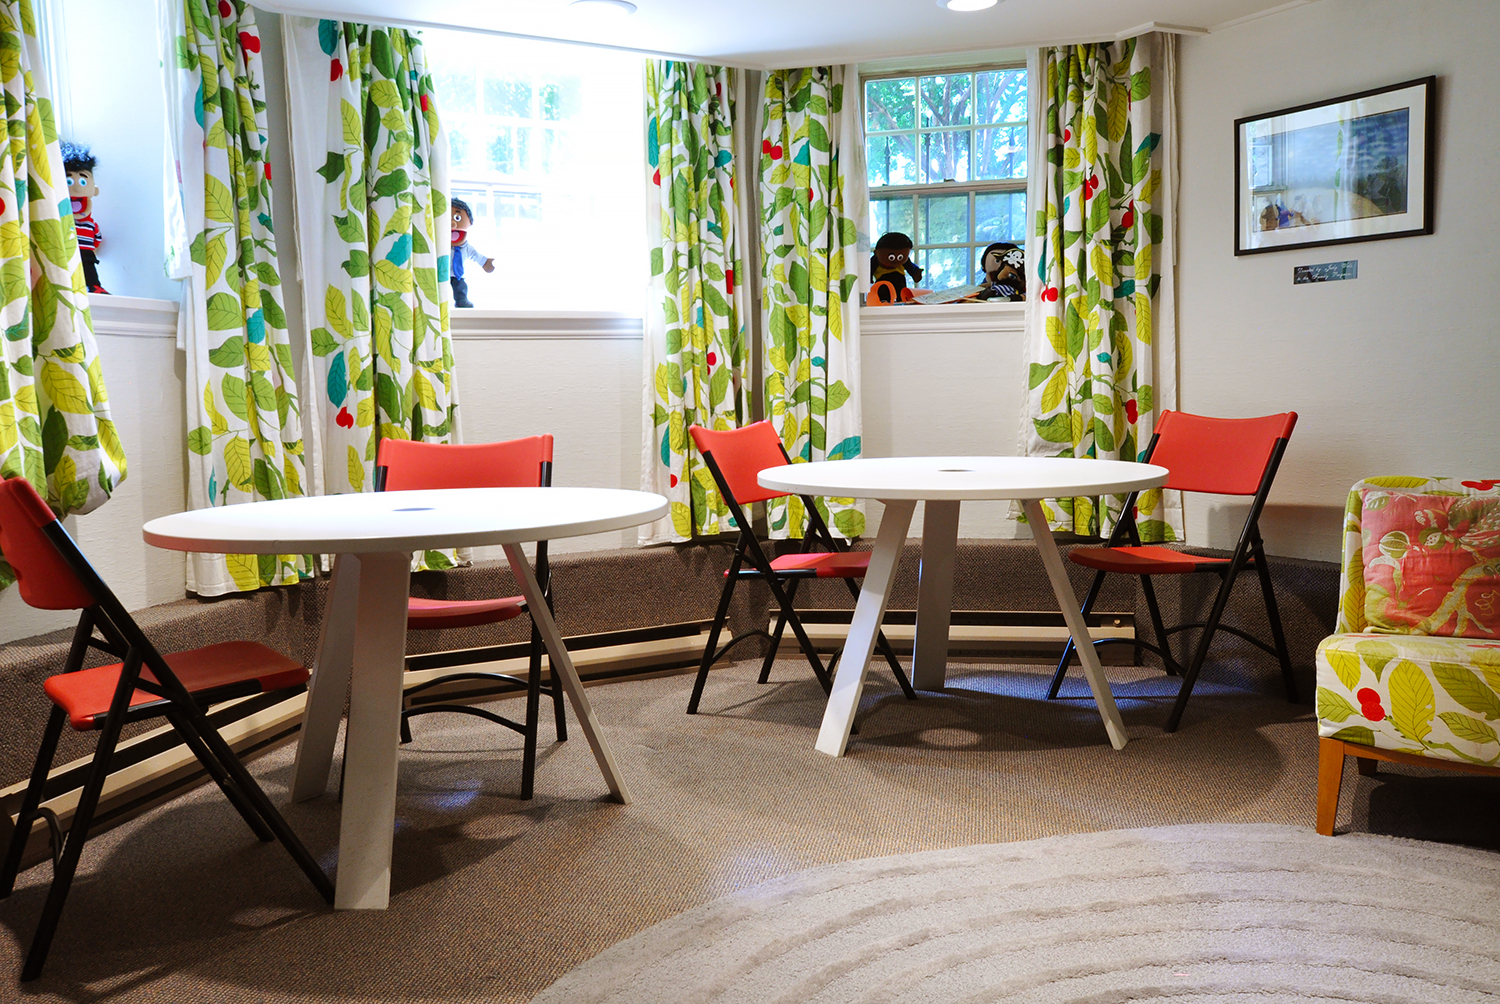 Tables and chairs at Wright Centre Family Care room.